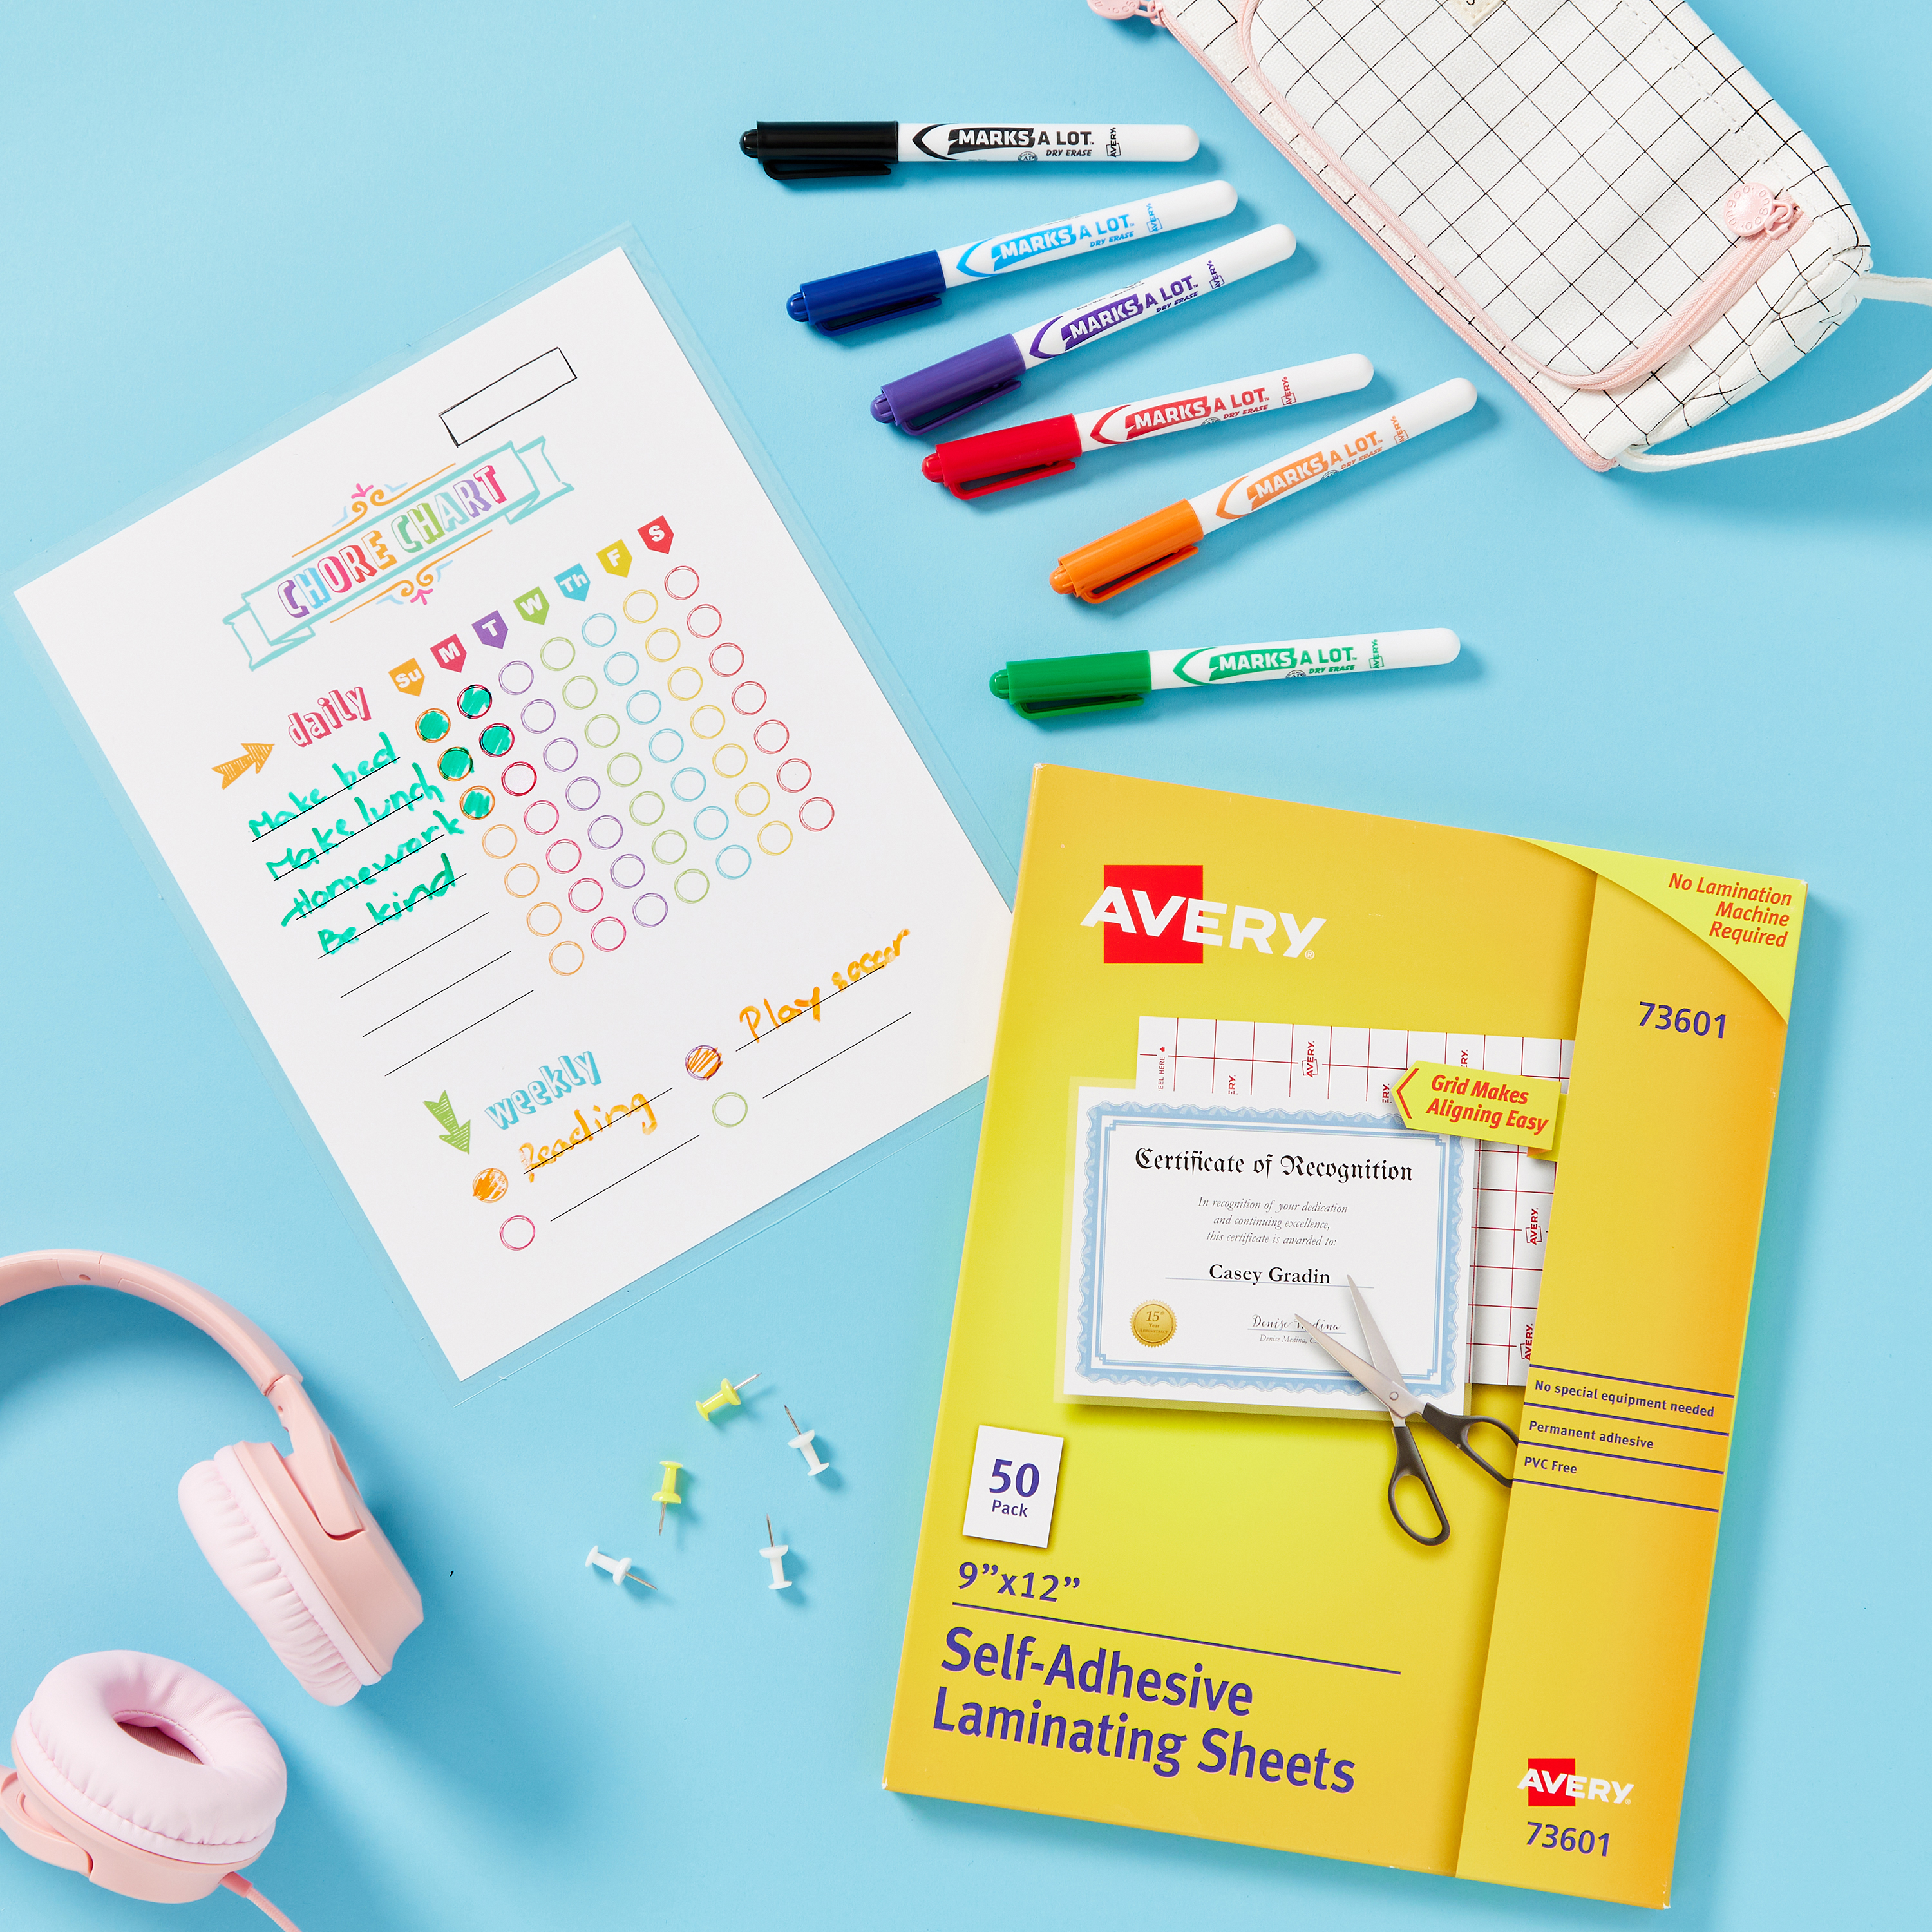 Sticker Book - Too Cool for School - Edition 6. Decorate, Color-Code, Enhance and Organize Your School Planner! 12 Pages of stickers. 600 Stickers